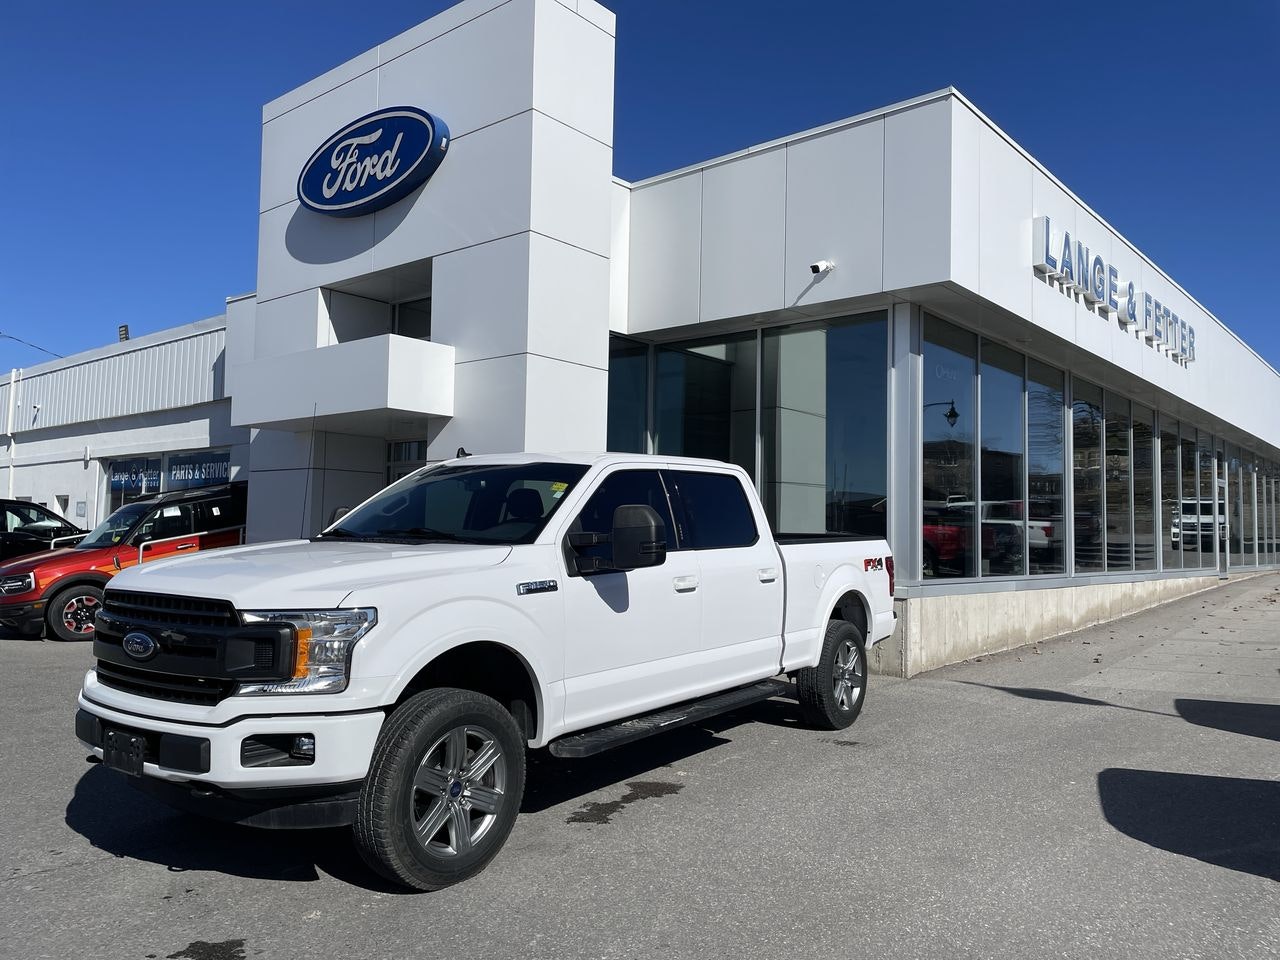 2020 Ford F-150 - 21747A Full Image 1